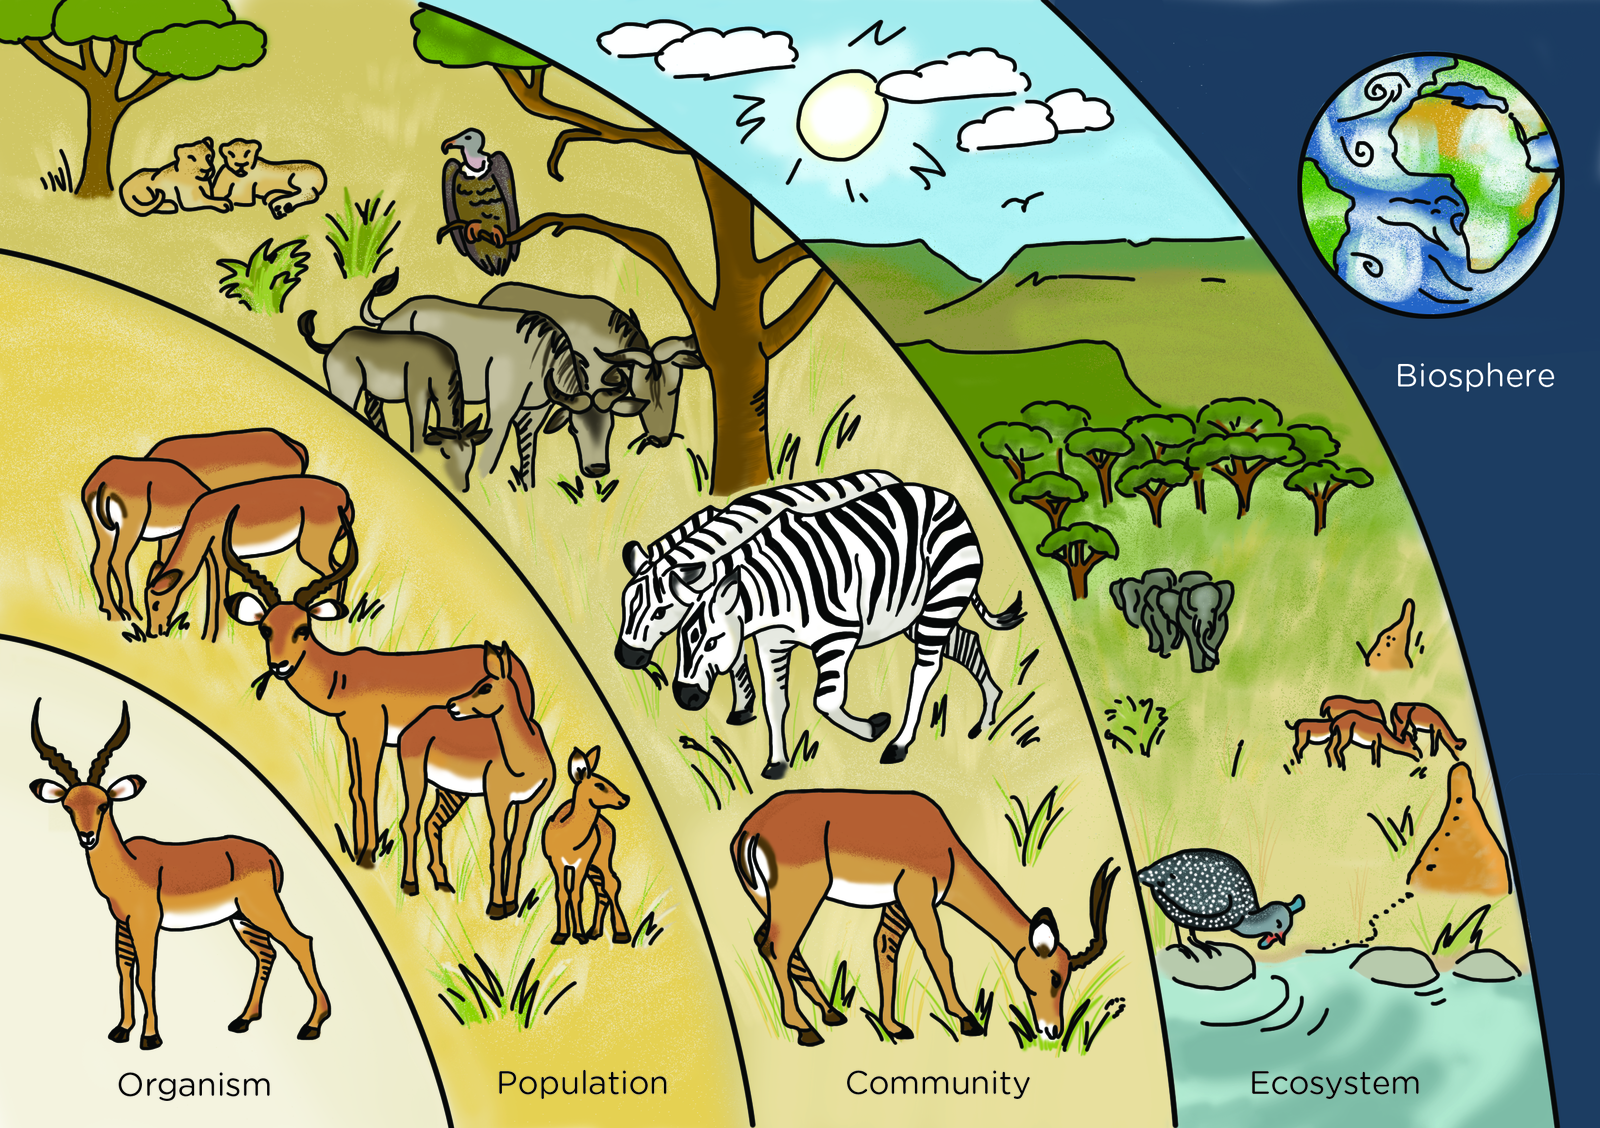 study of ecology is organized at different levels from small to large.